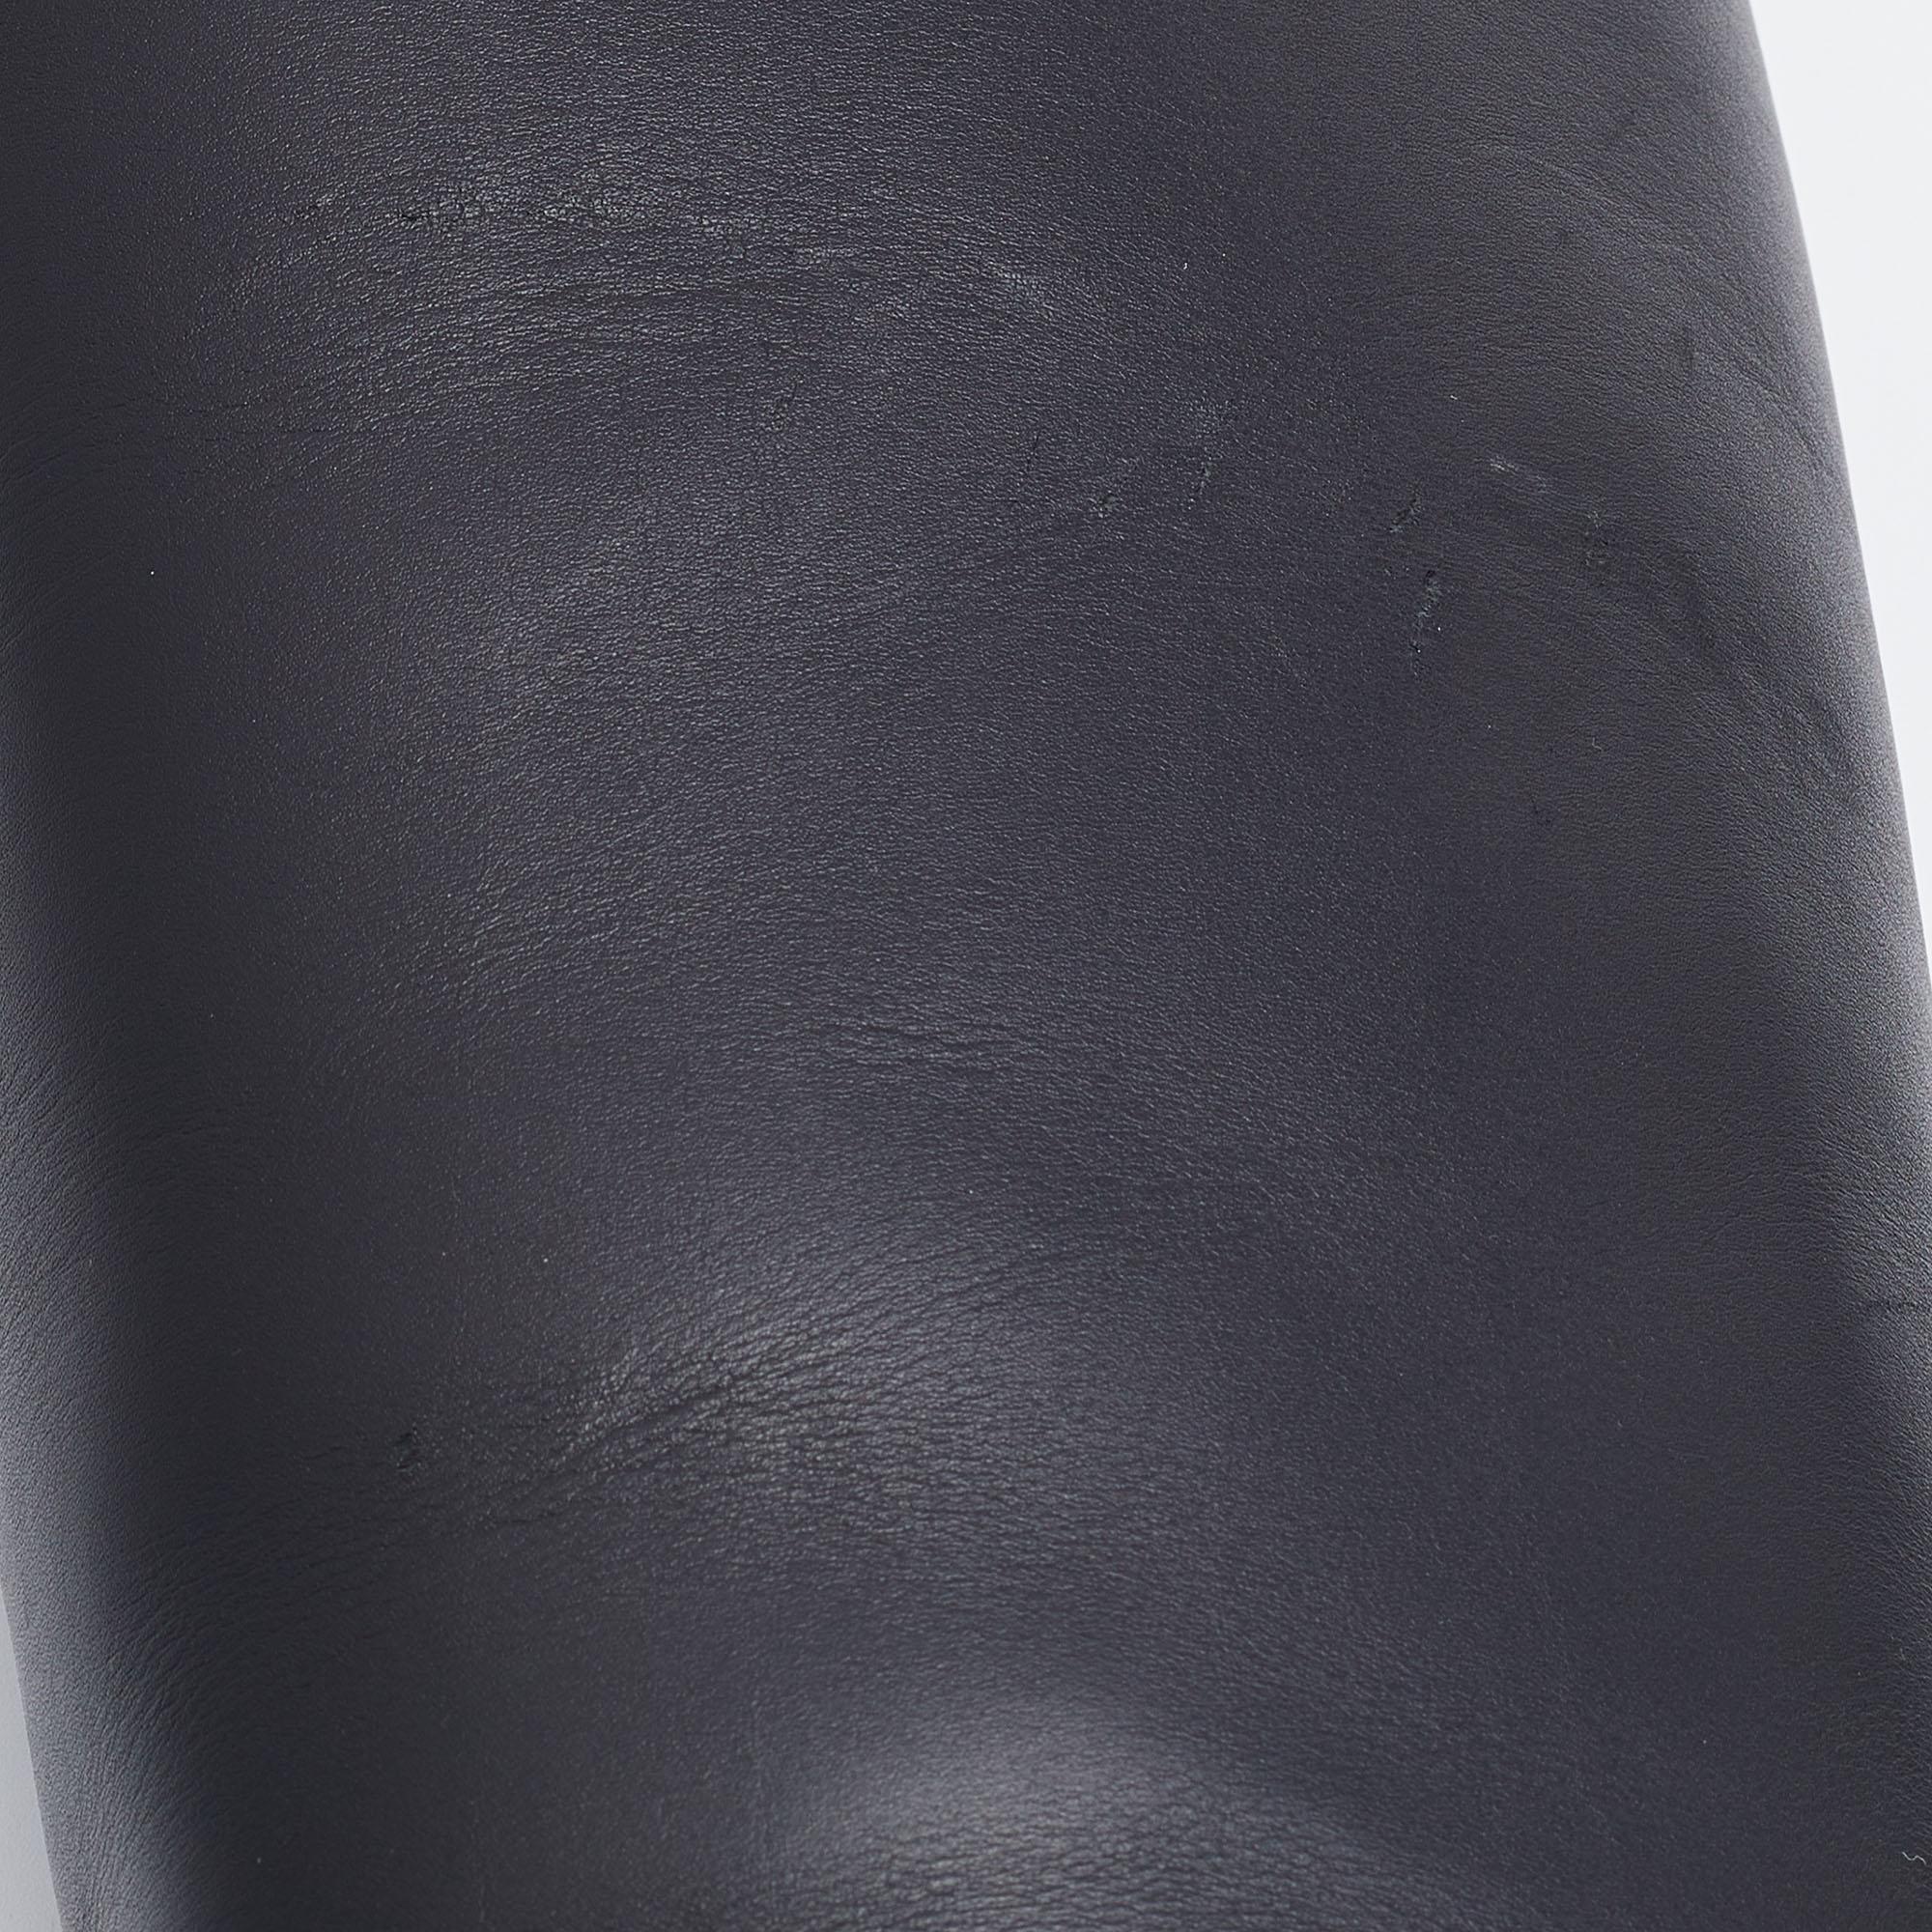 Hermes Black Leather Story Knee Length Boots Size 37.5 5